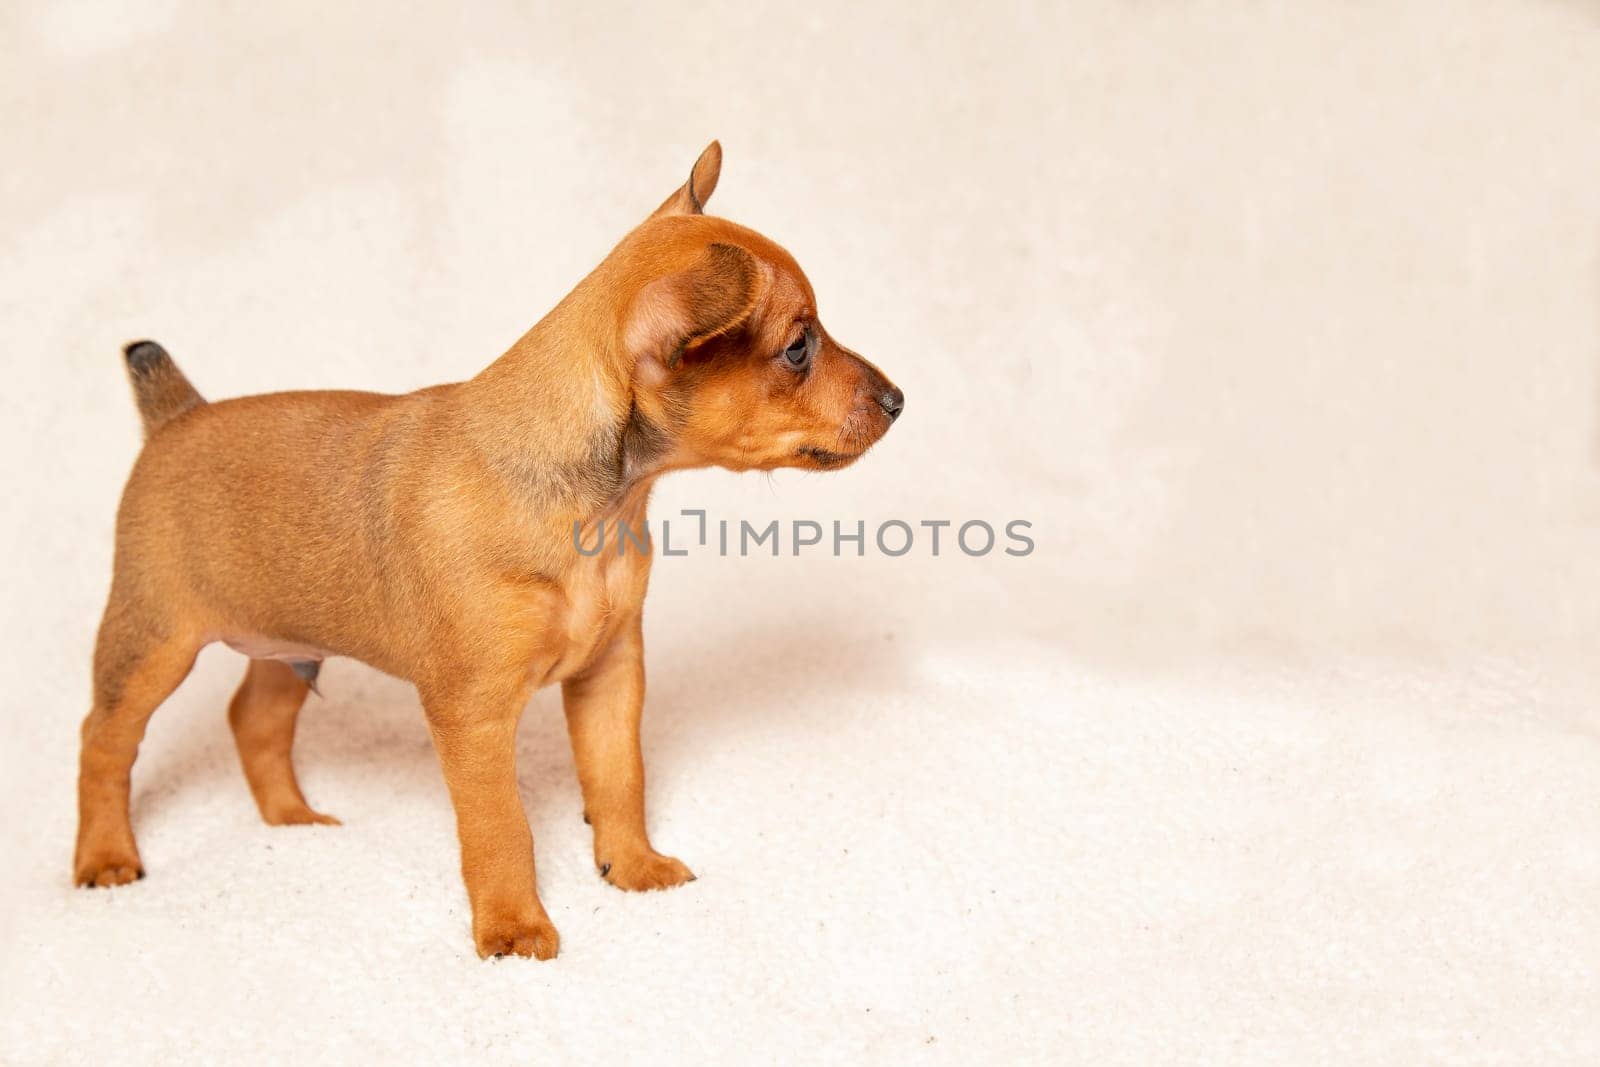 The little dog stands and looks away. Cute puppy on a light background, pinscher by BetterPhoto